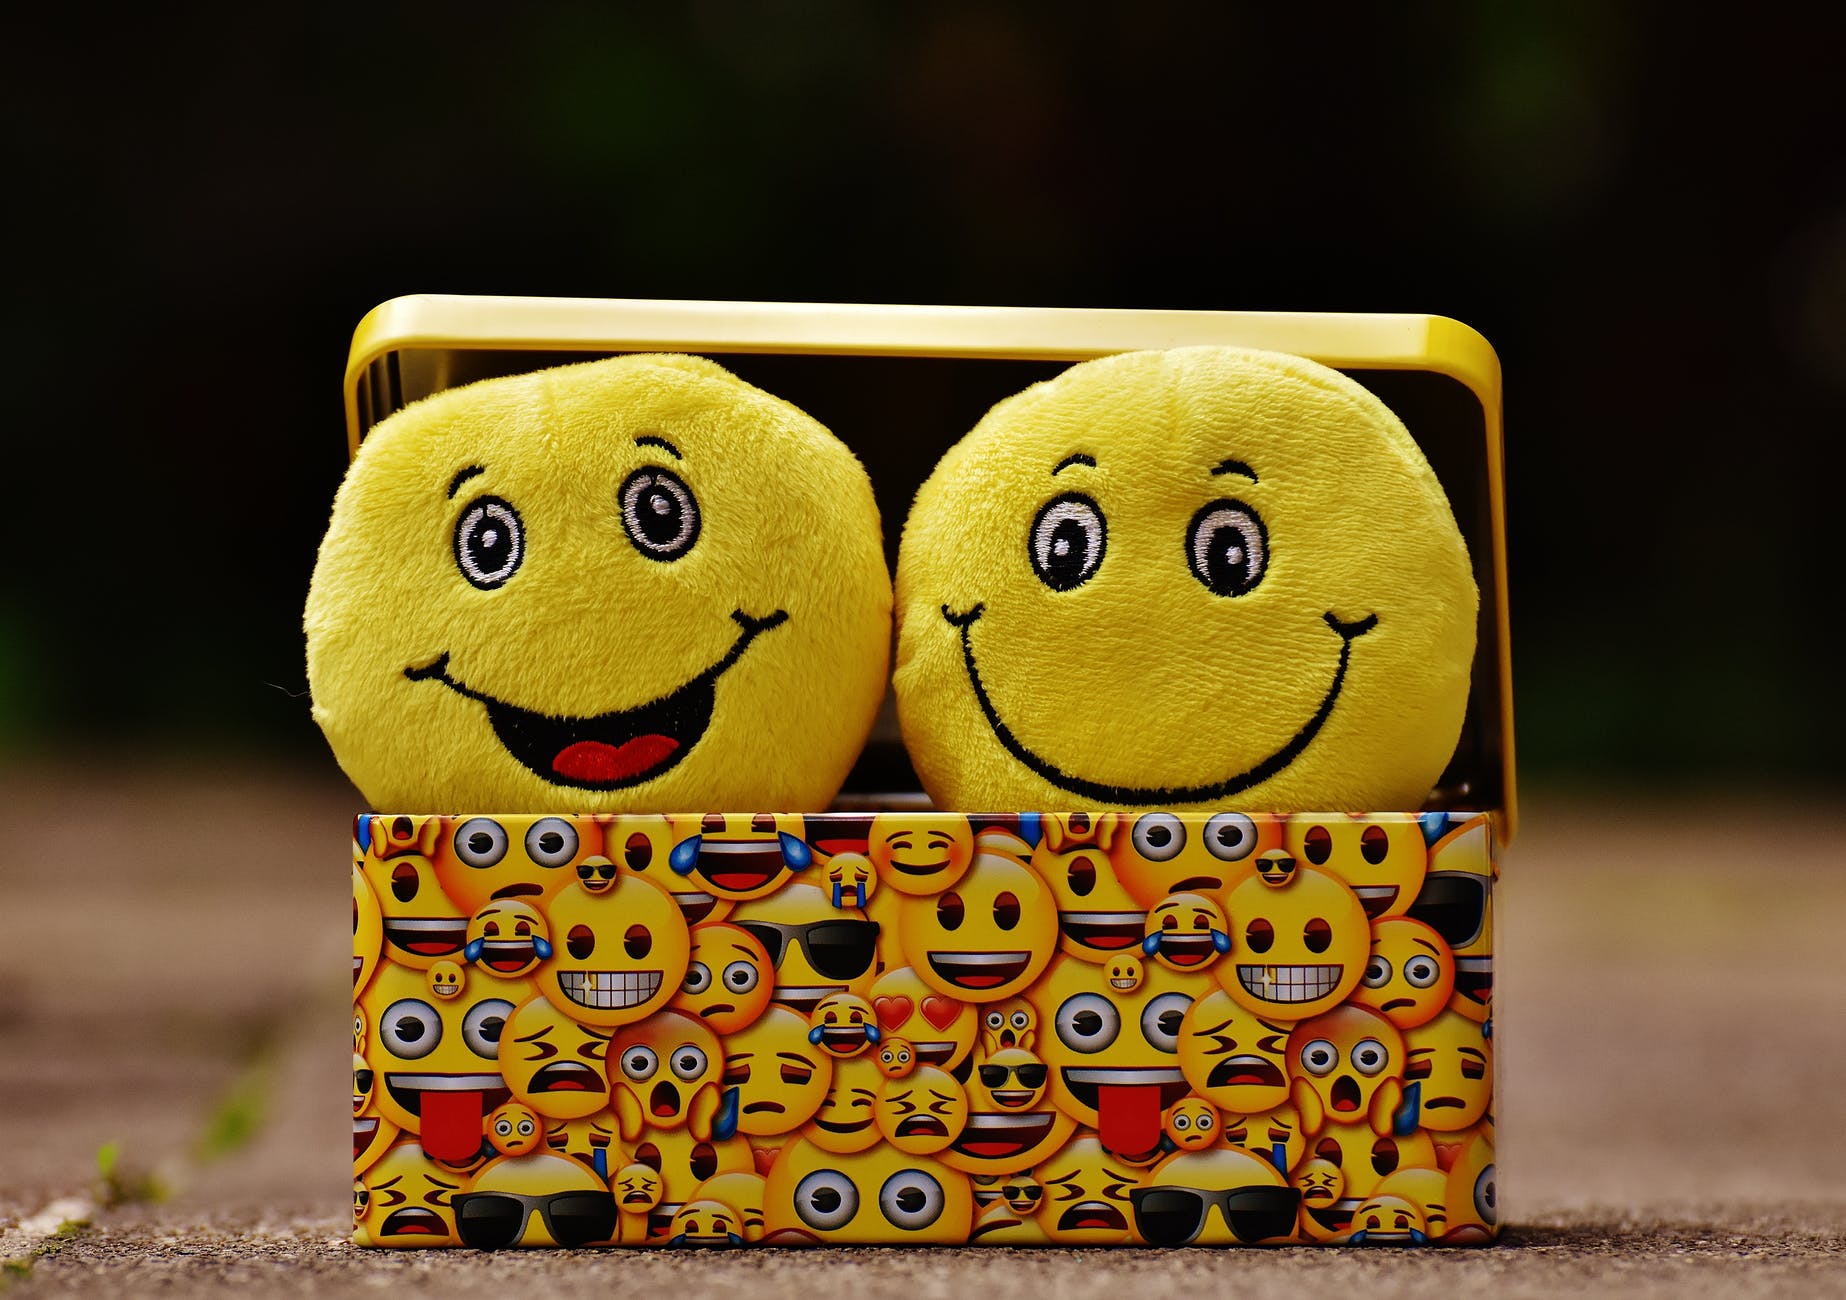 Two toy smiling faces emerge from a box signifying contentment at seeing the finished mosaic.